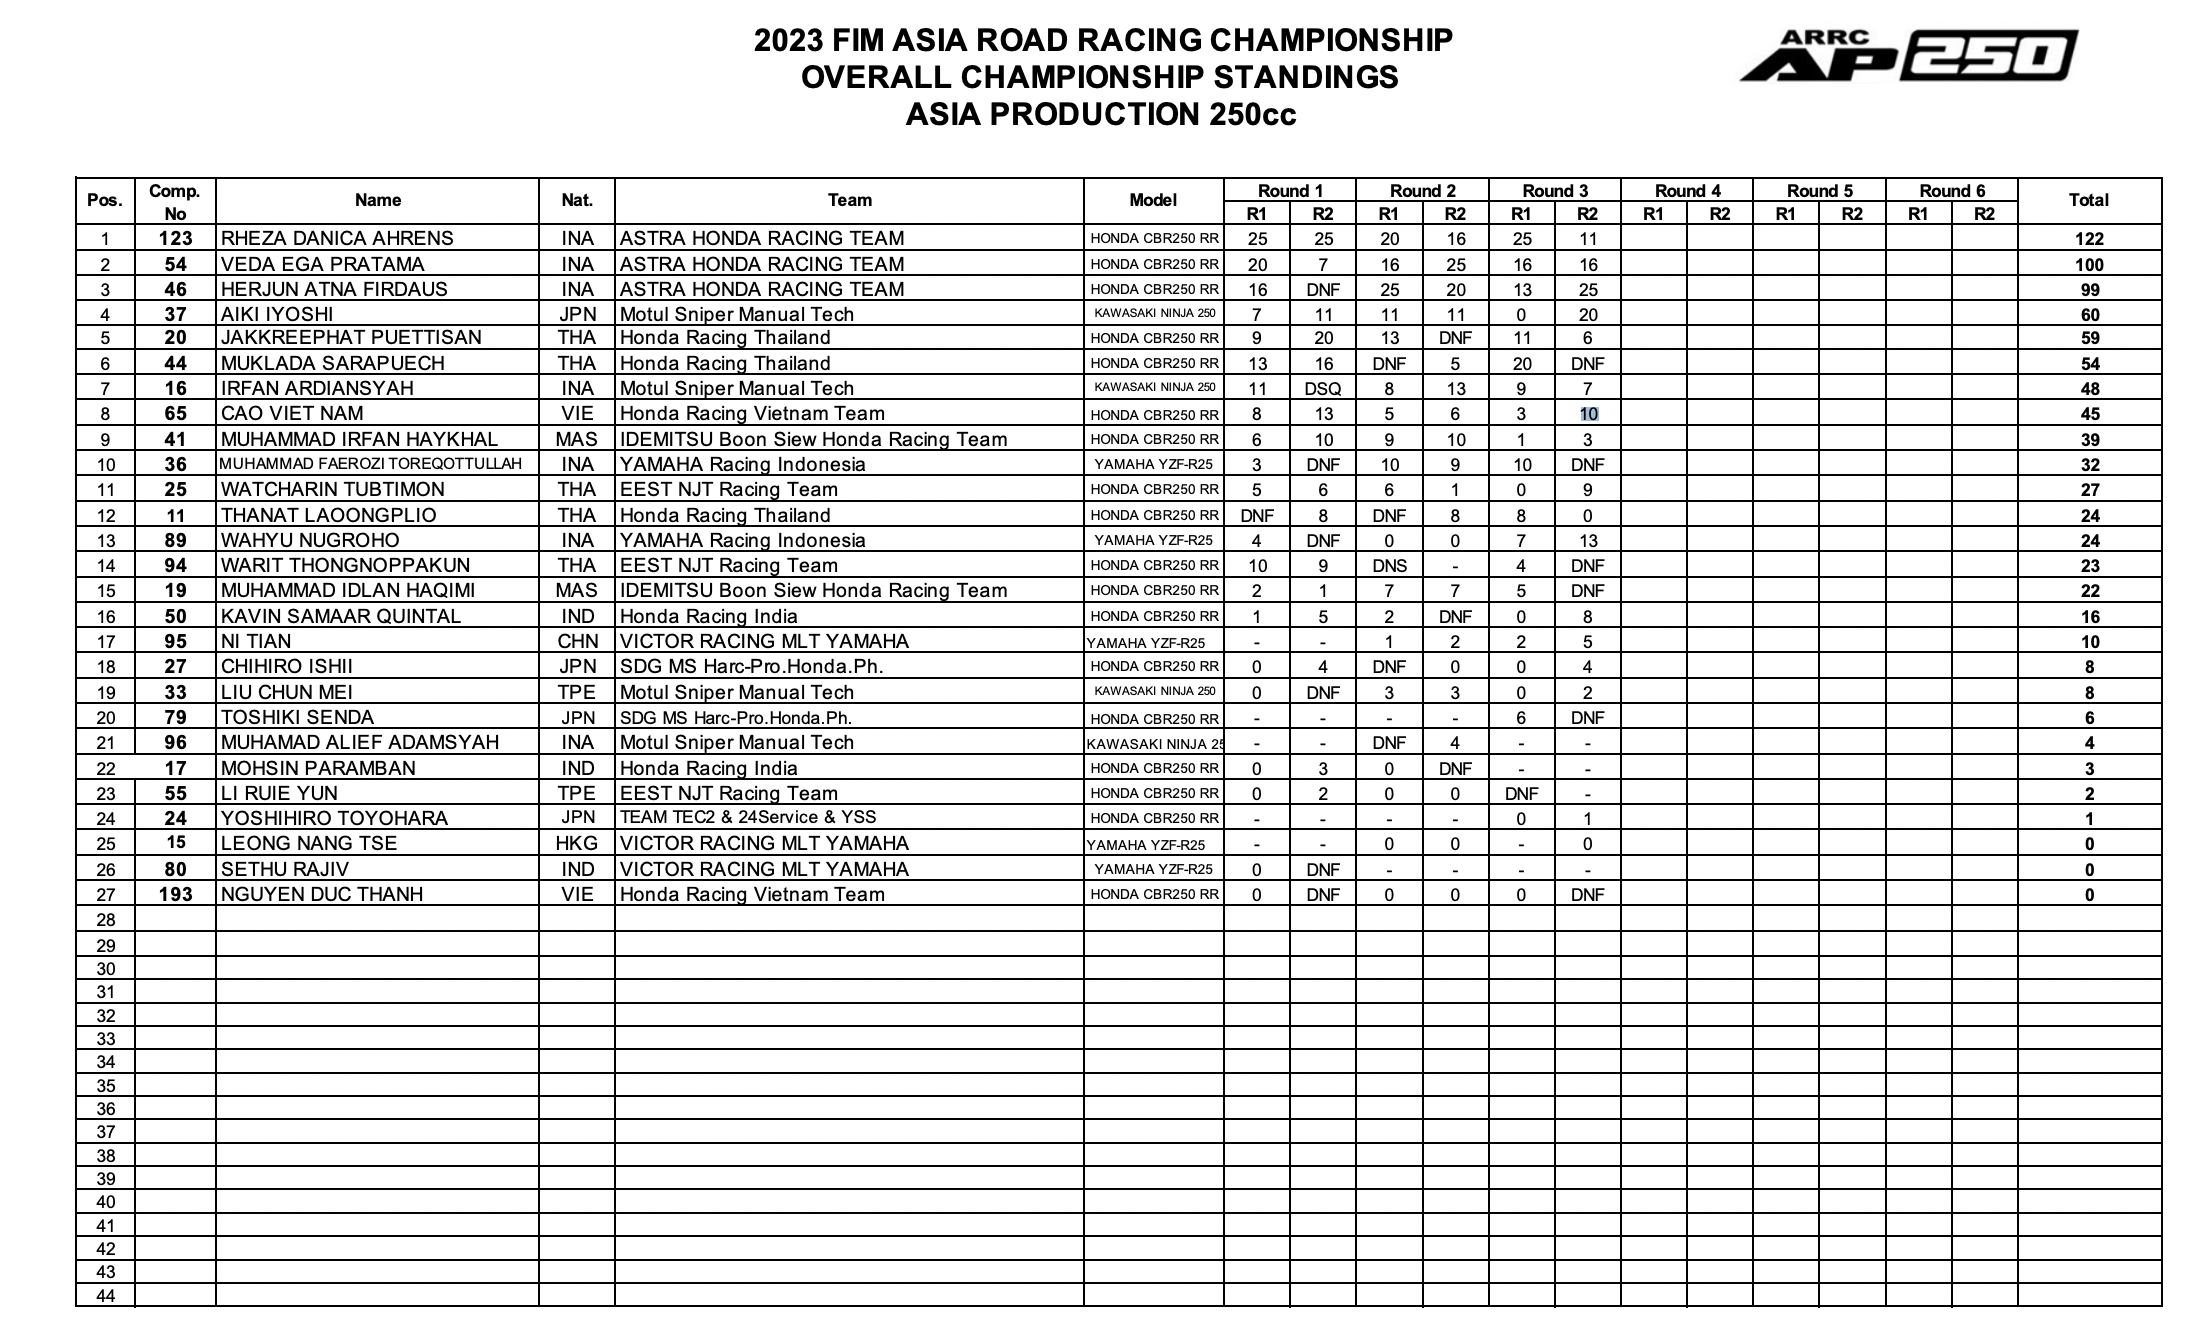 Race 2 AP250 Round 3 ARRC 2023 Results: Cao Viet Nam impressive finished 6th screen-shot-2023-06-25-at-155130.png